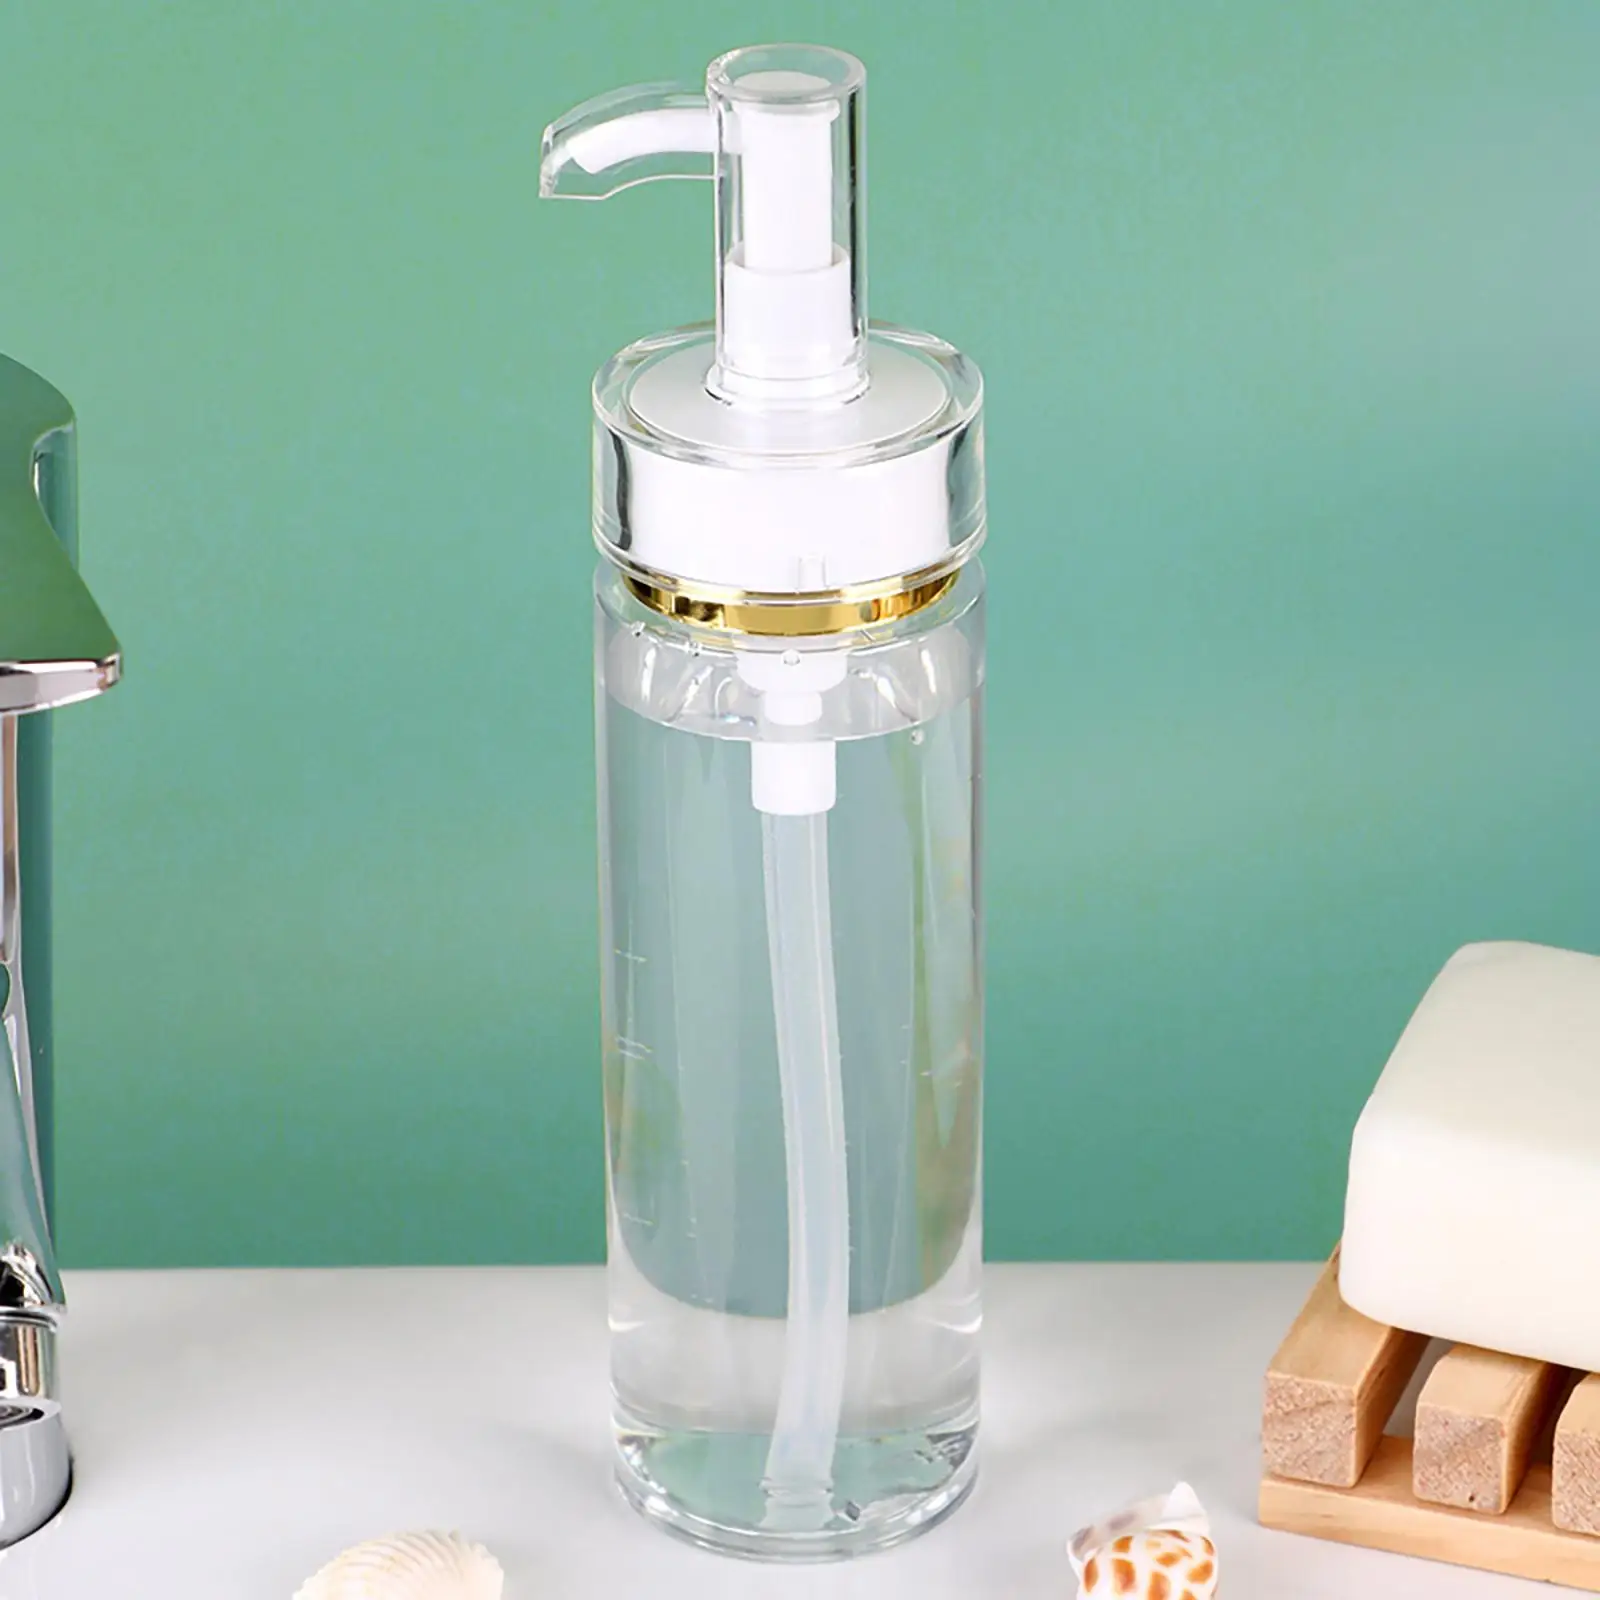 150ml Lotion Bottles with Pumps Clear Portable Refillable Travel Container for Washing Soap Makeup Liquid Shower Shampoo